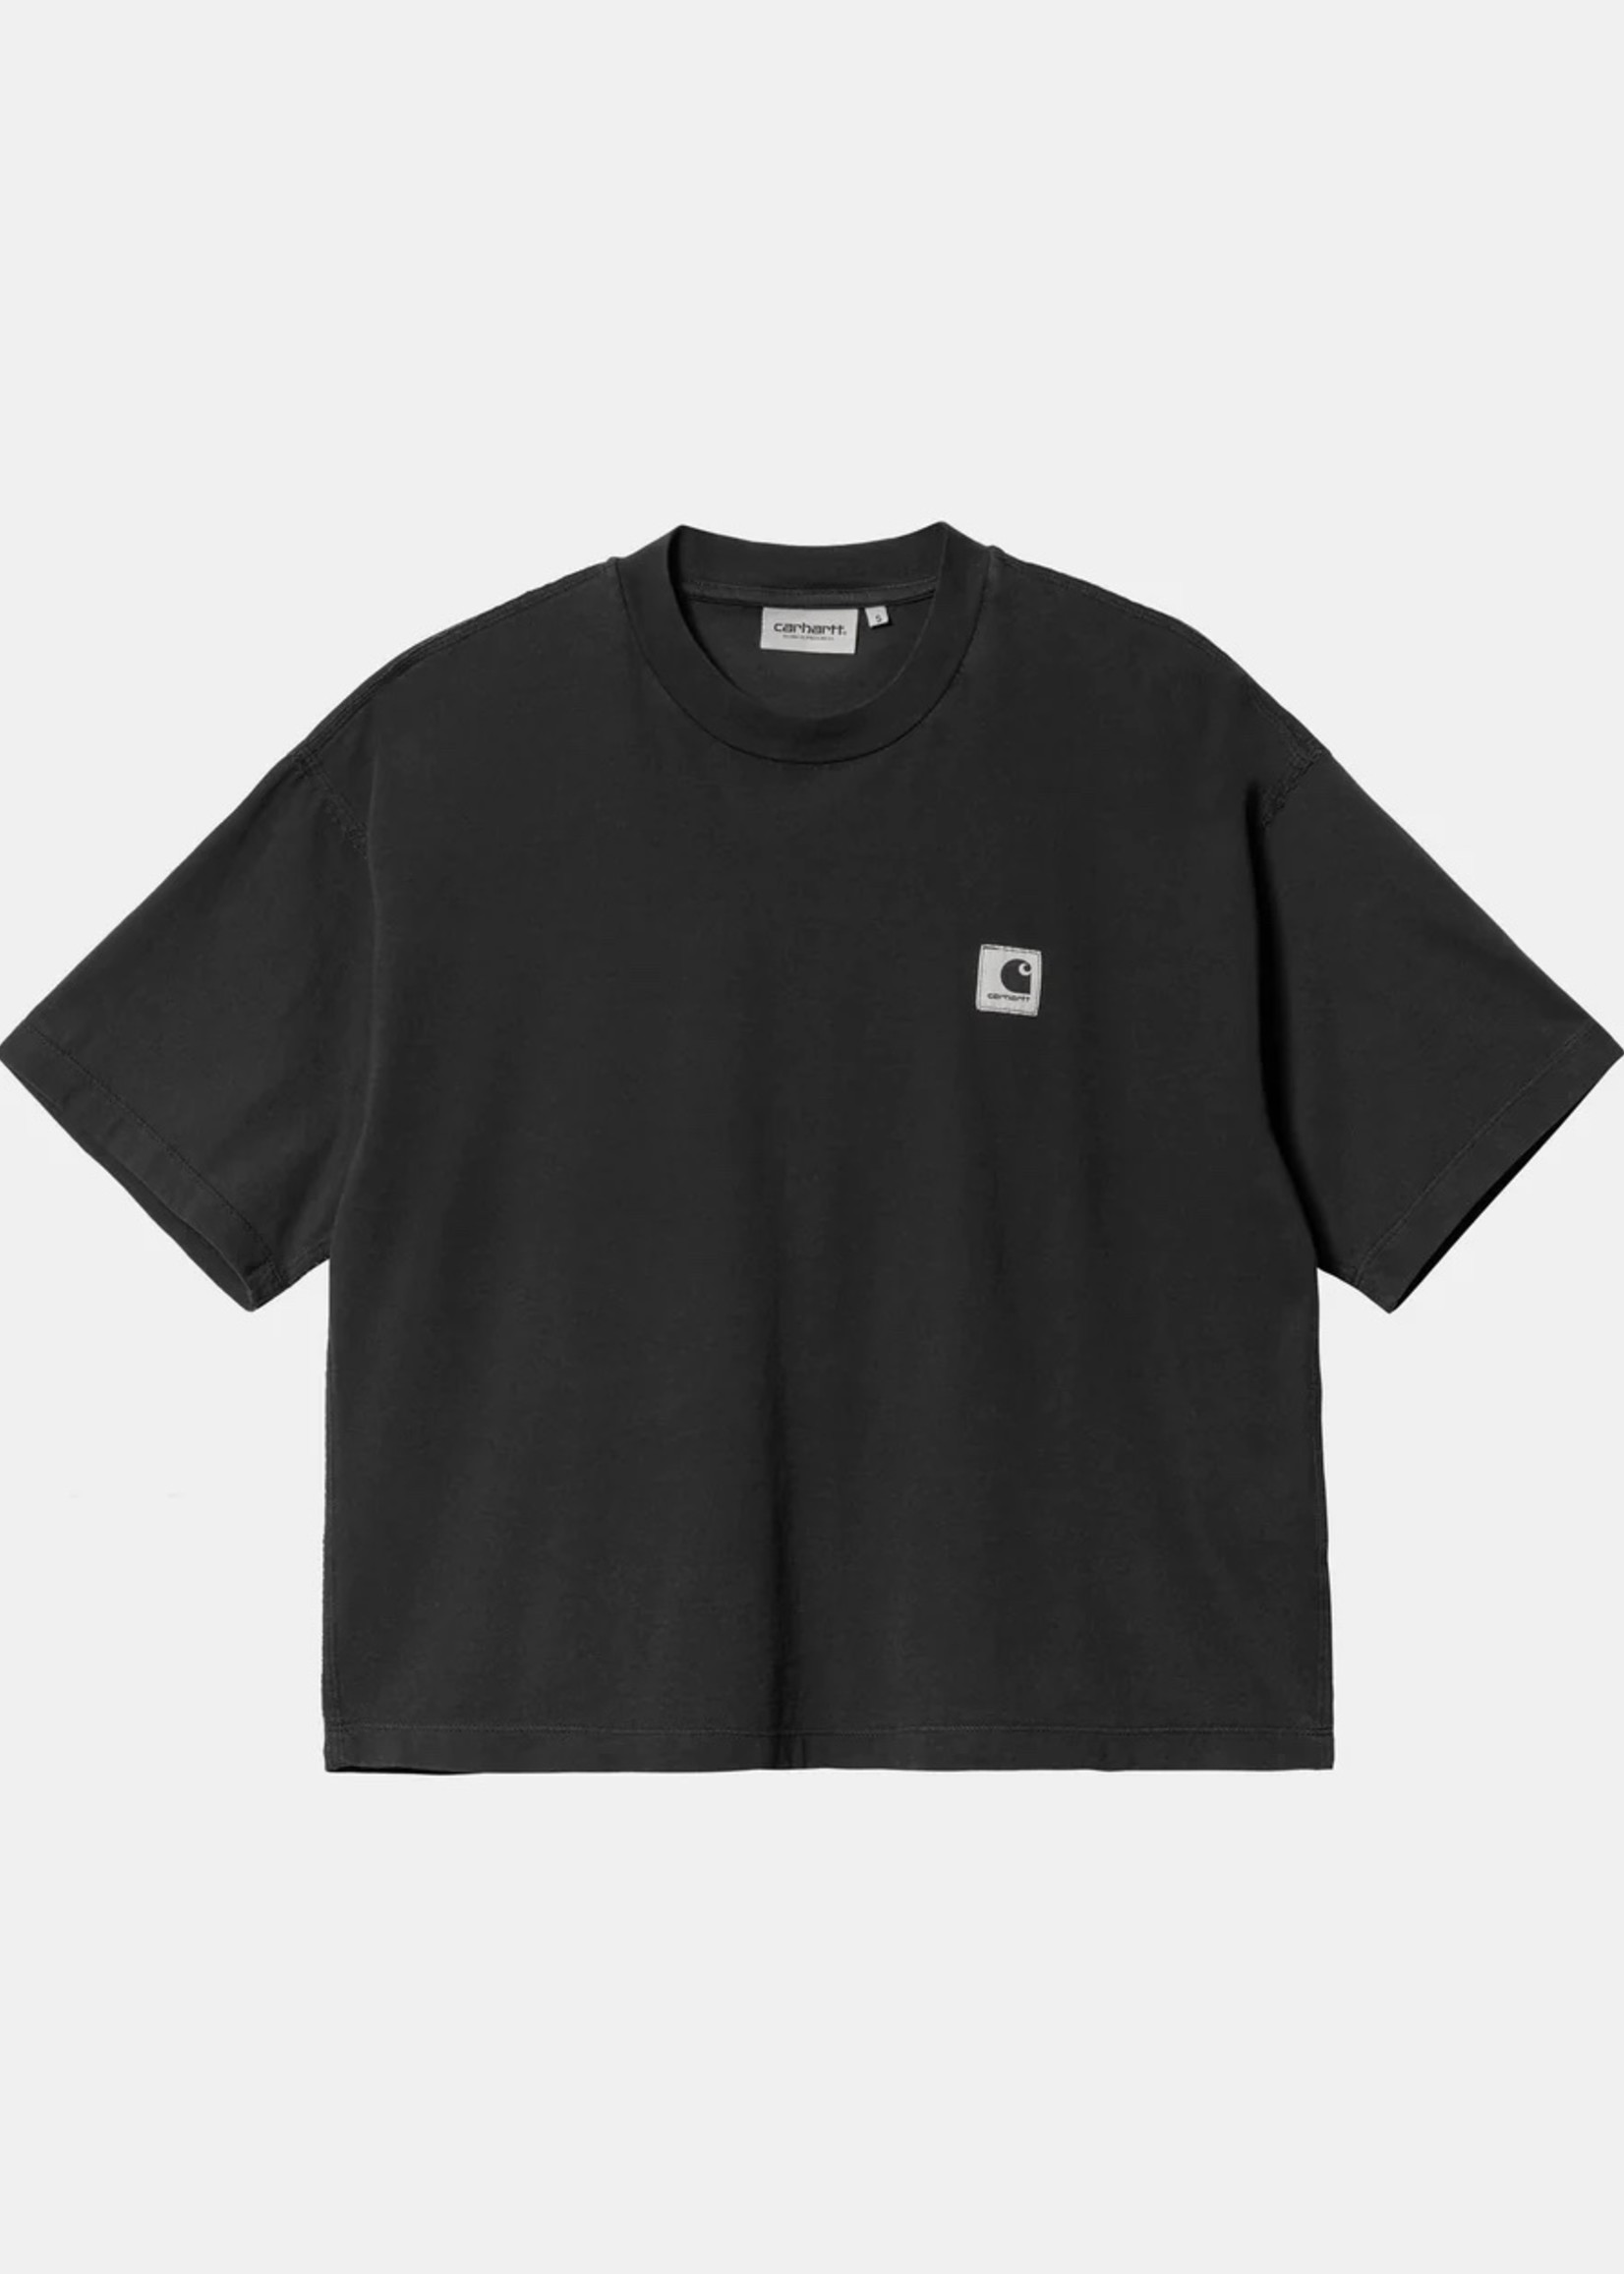 Carhartt Work In Progress Women's Cropped Tacoma Tee in Washed Black